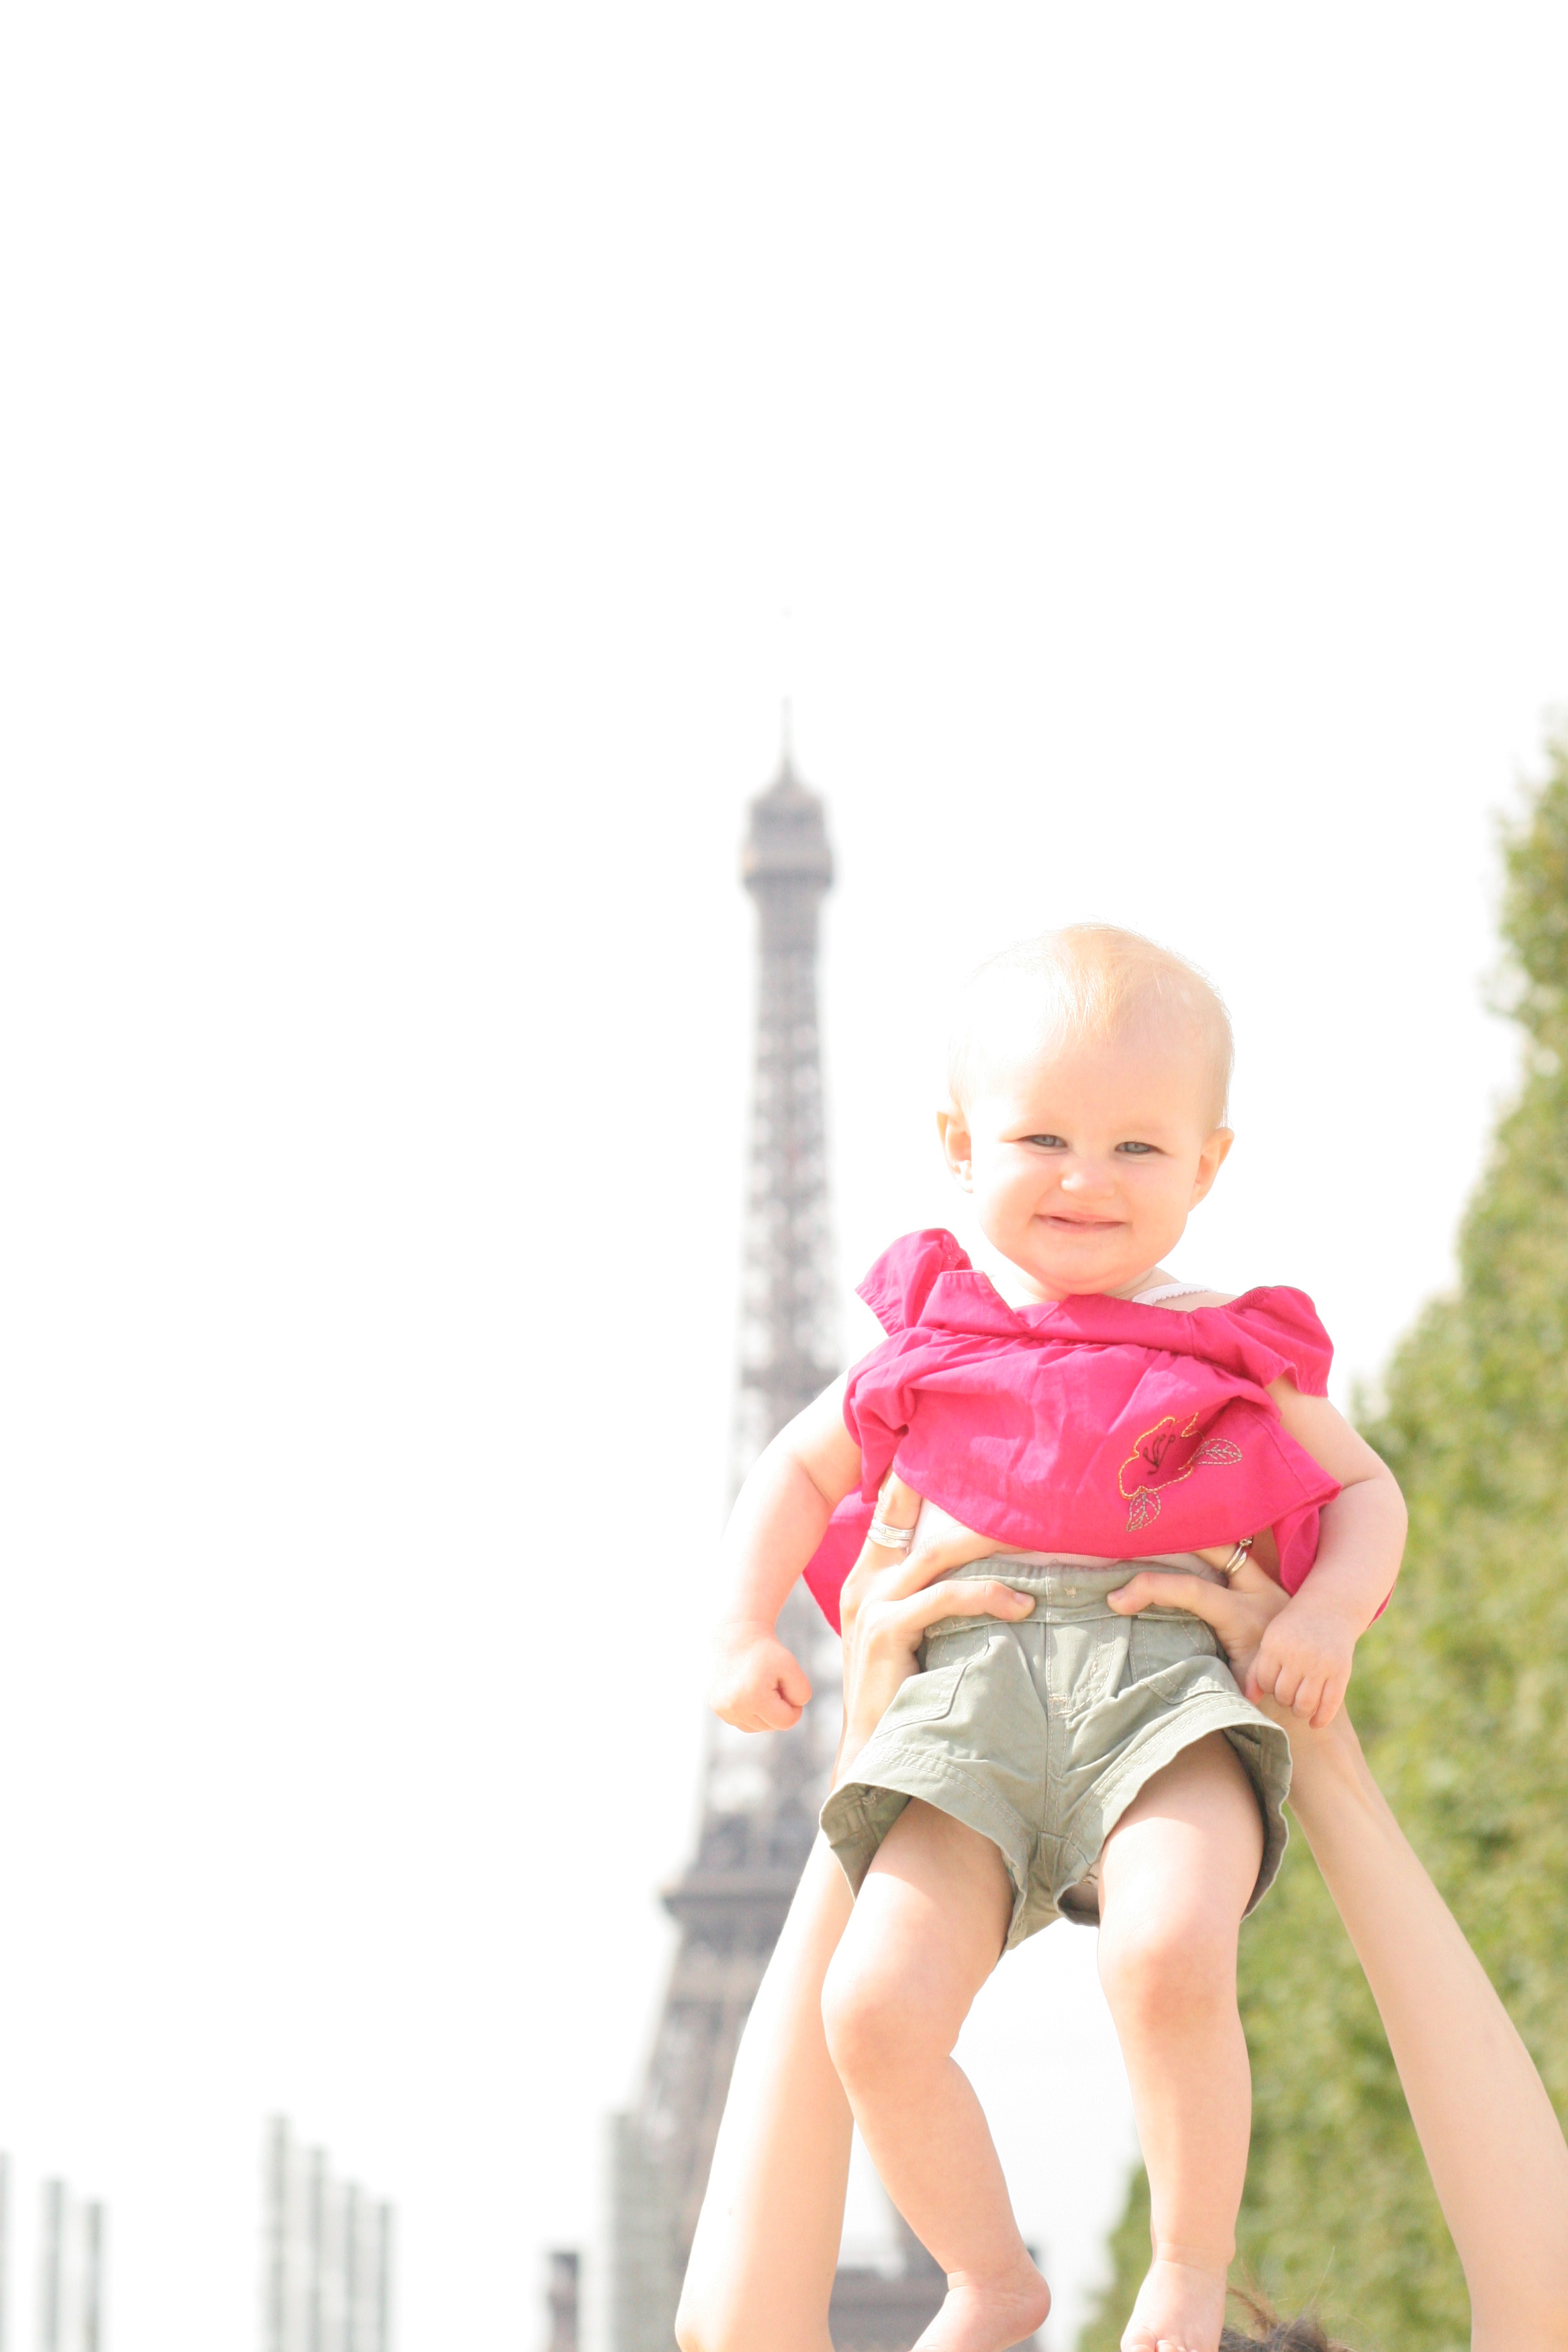 Maisie saying goodbye to the eiffel tower our last day in Paris